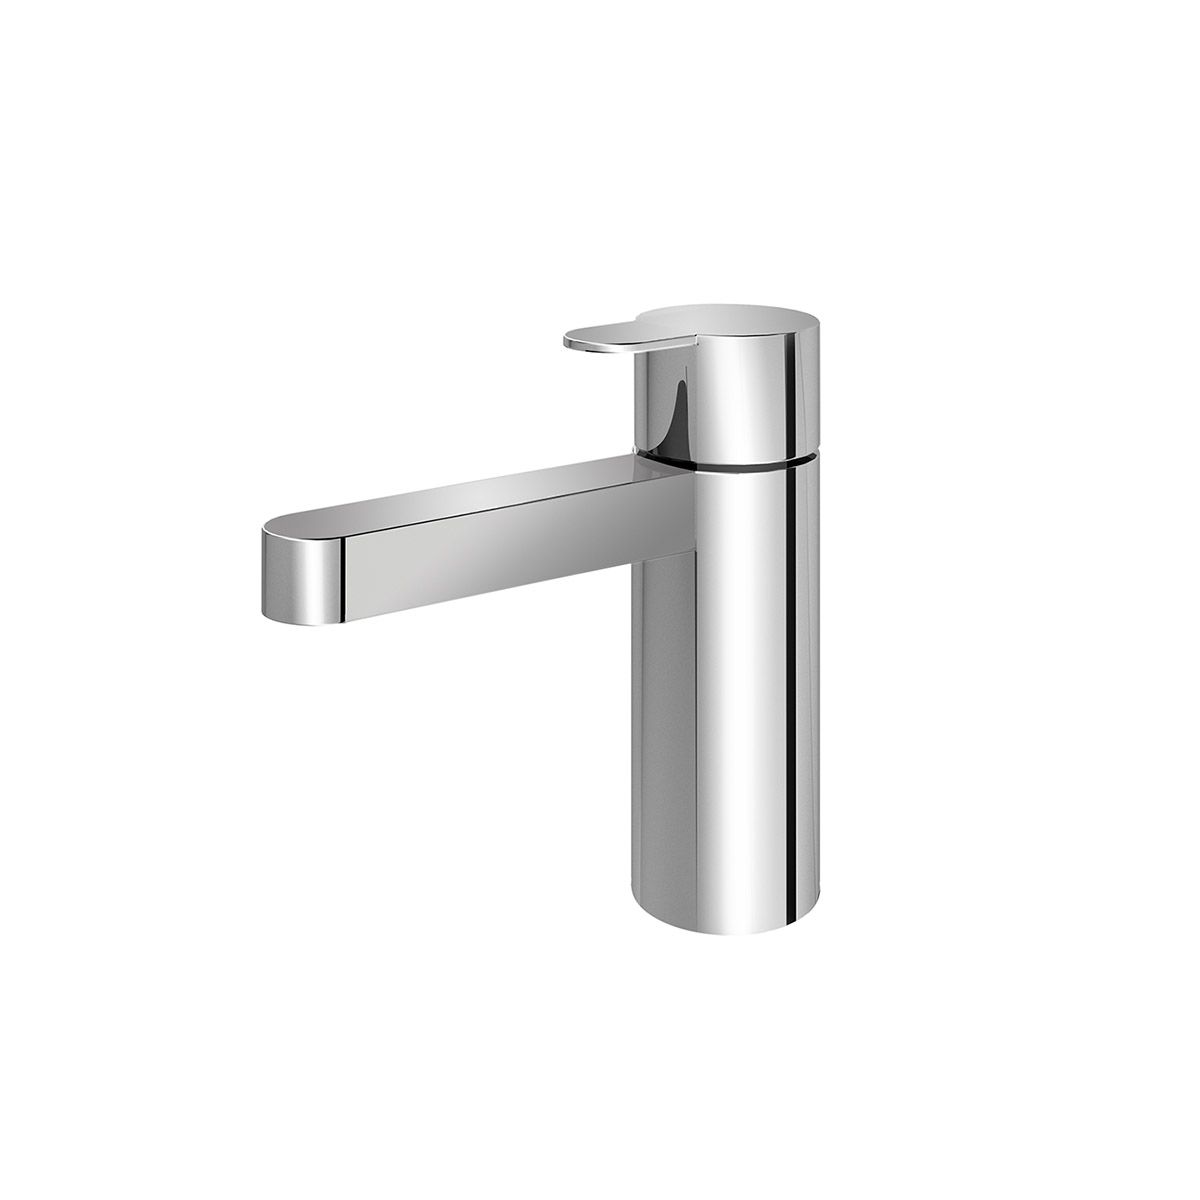 Faucet Types - Deck Mounted Faucet